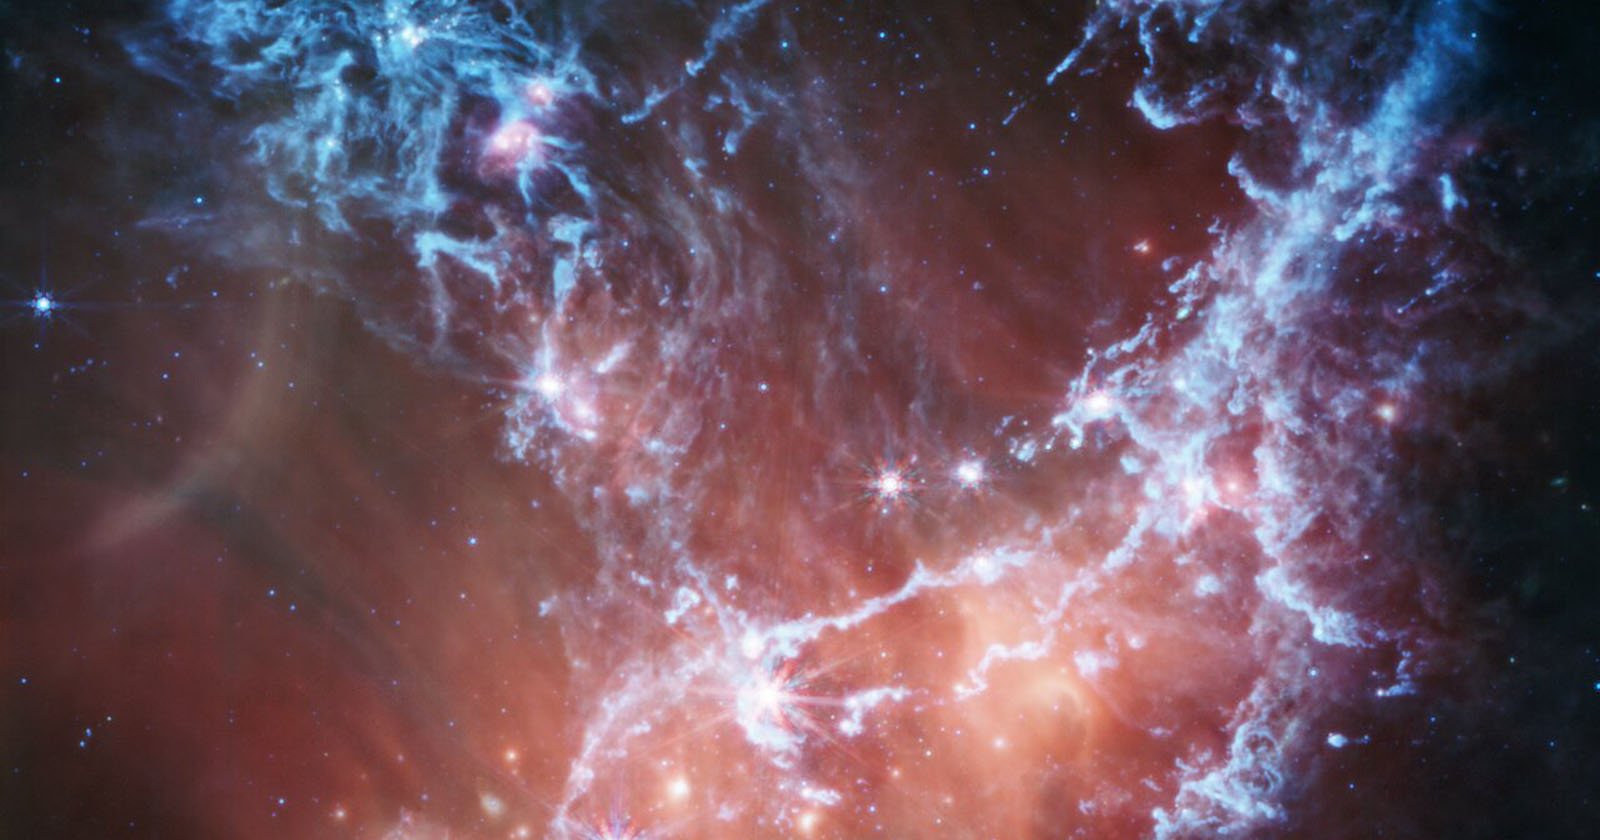 Webb Space Telescope Captures Ethereal View of a Stellar Nursery